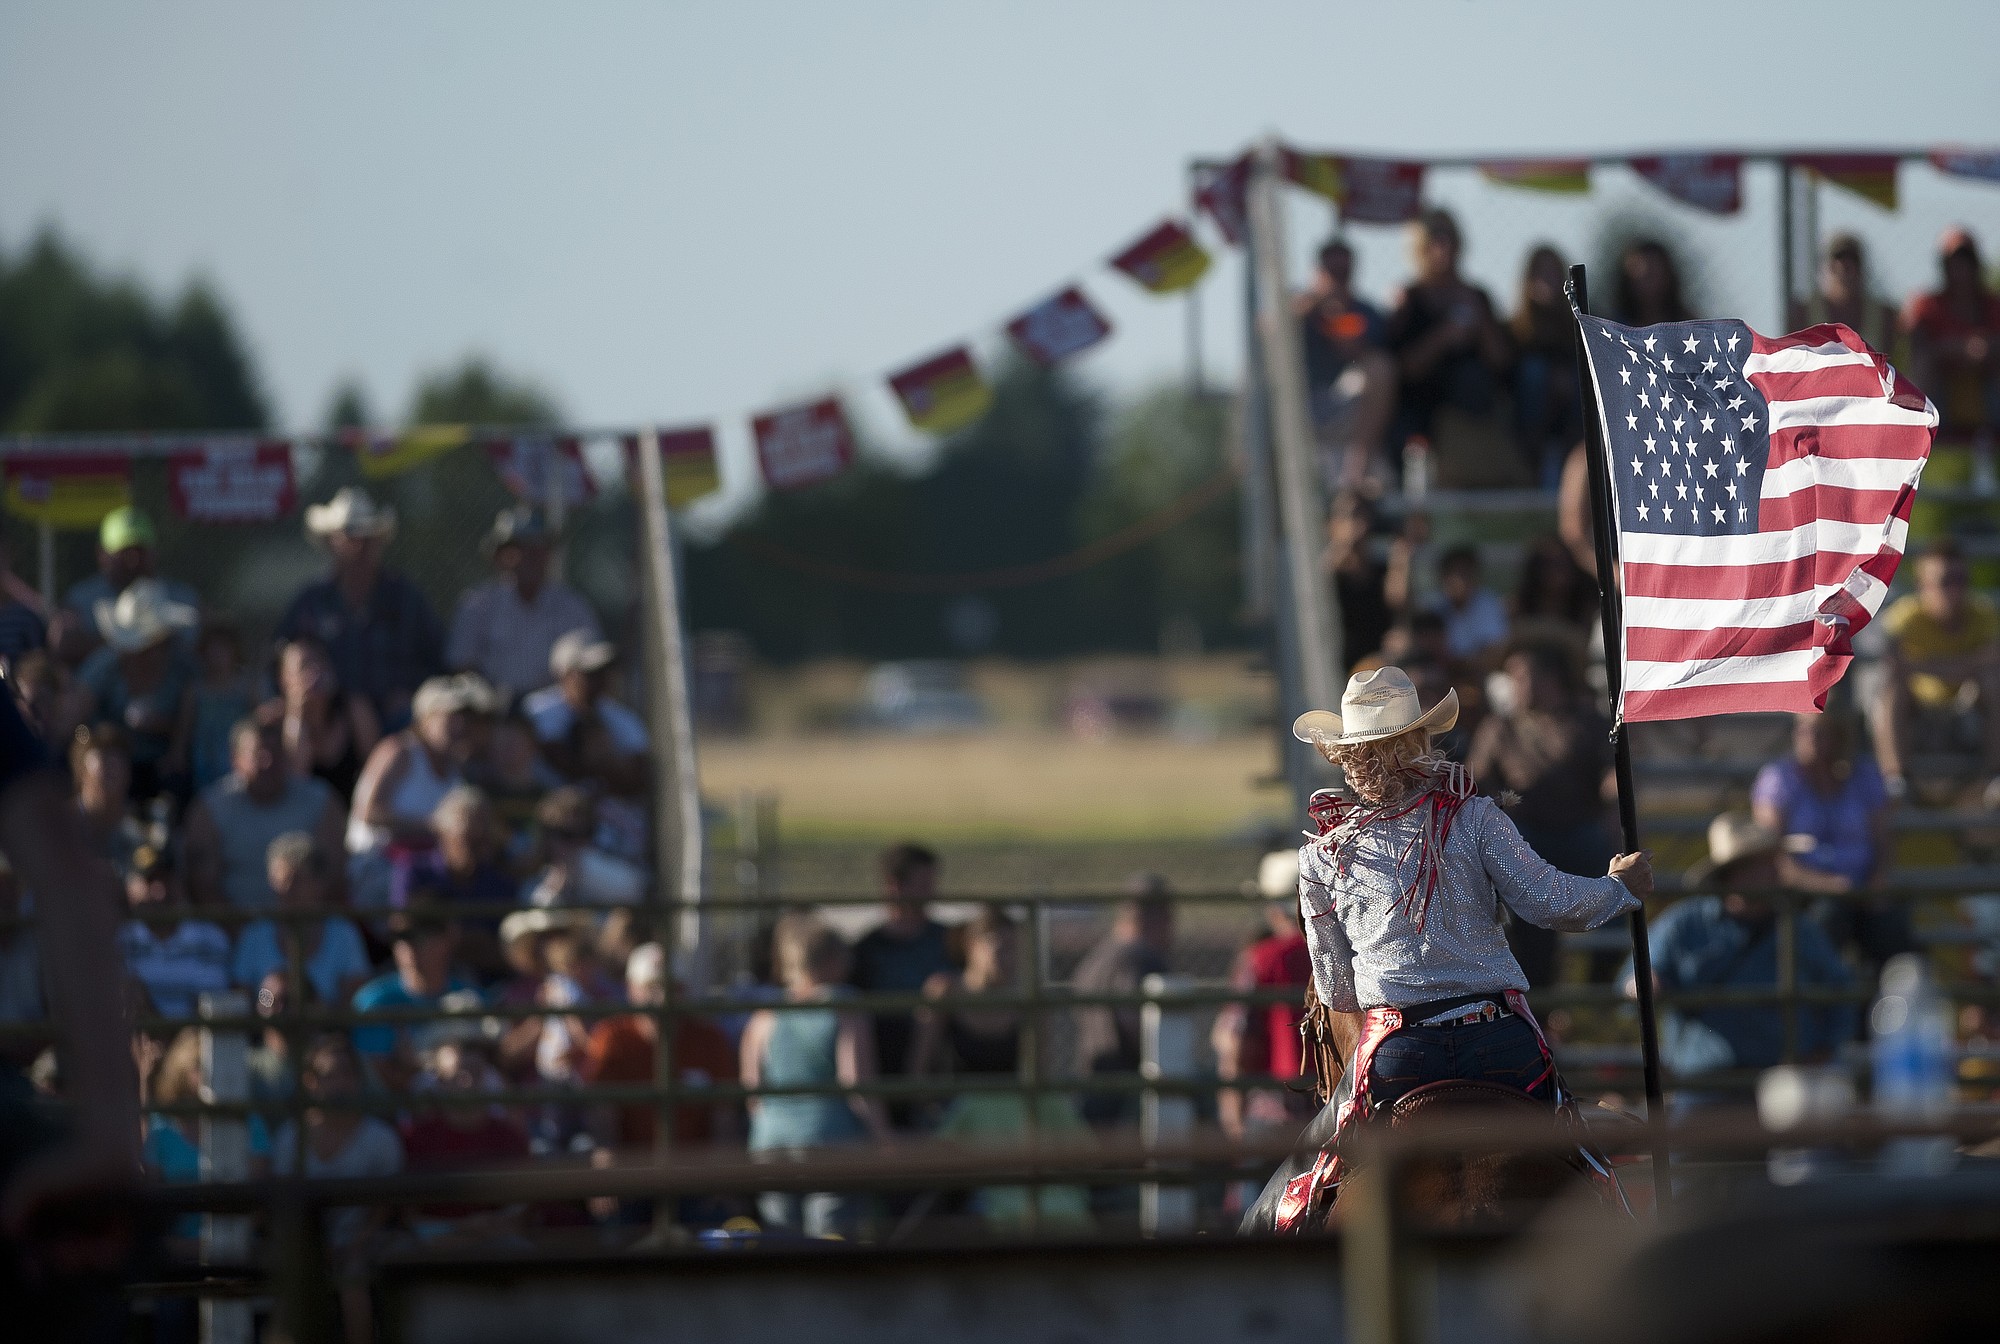 A rider carries an American flag at the beginning of the Vancouver Rodeo at the Clark County Saddle Club on Saturday July 7, 2012.